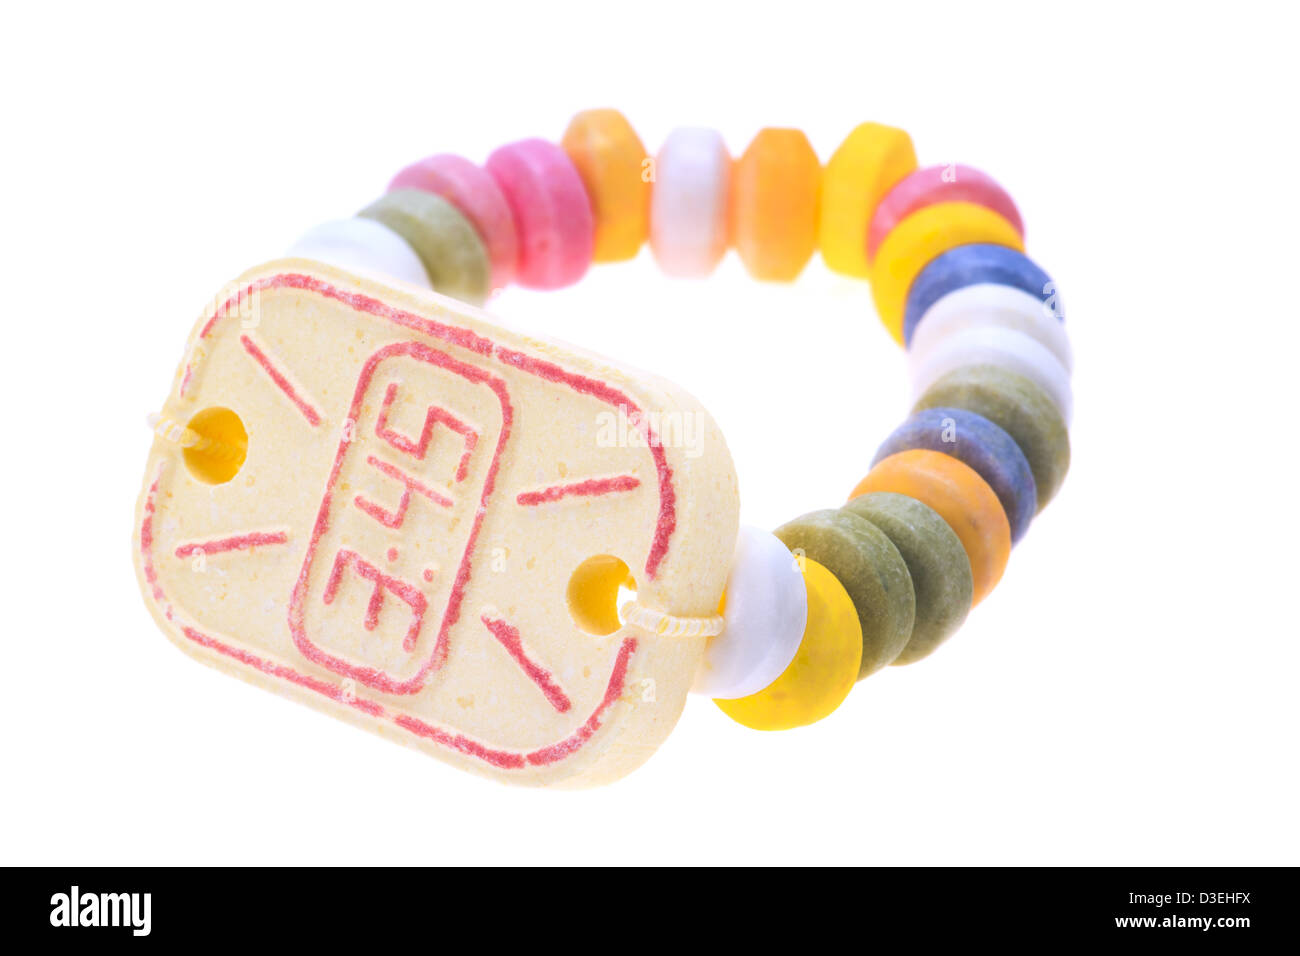 A sweet edible candy wrist watch - studio shot with a shallow depth of field and white background Stock Photo